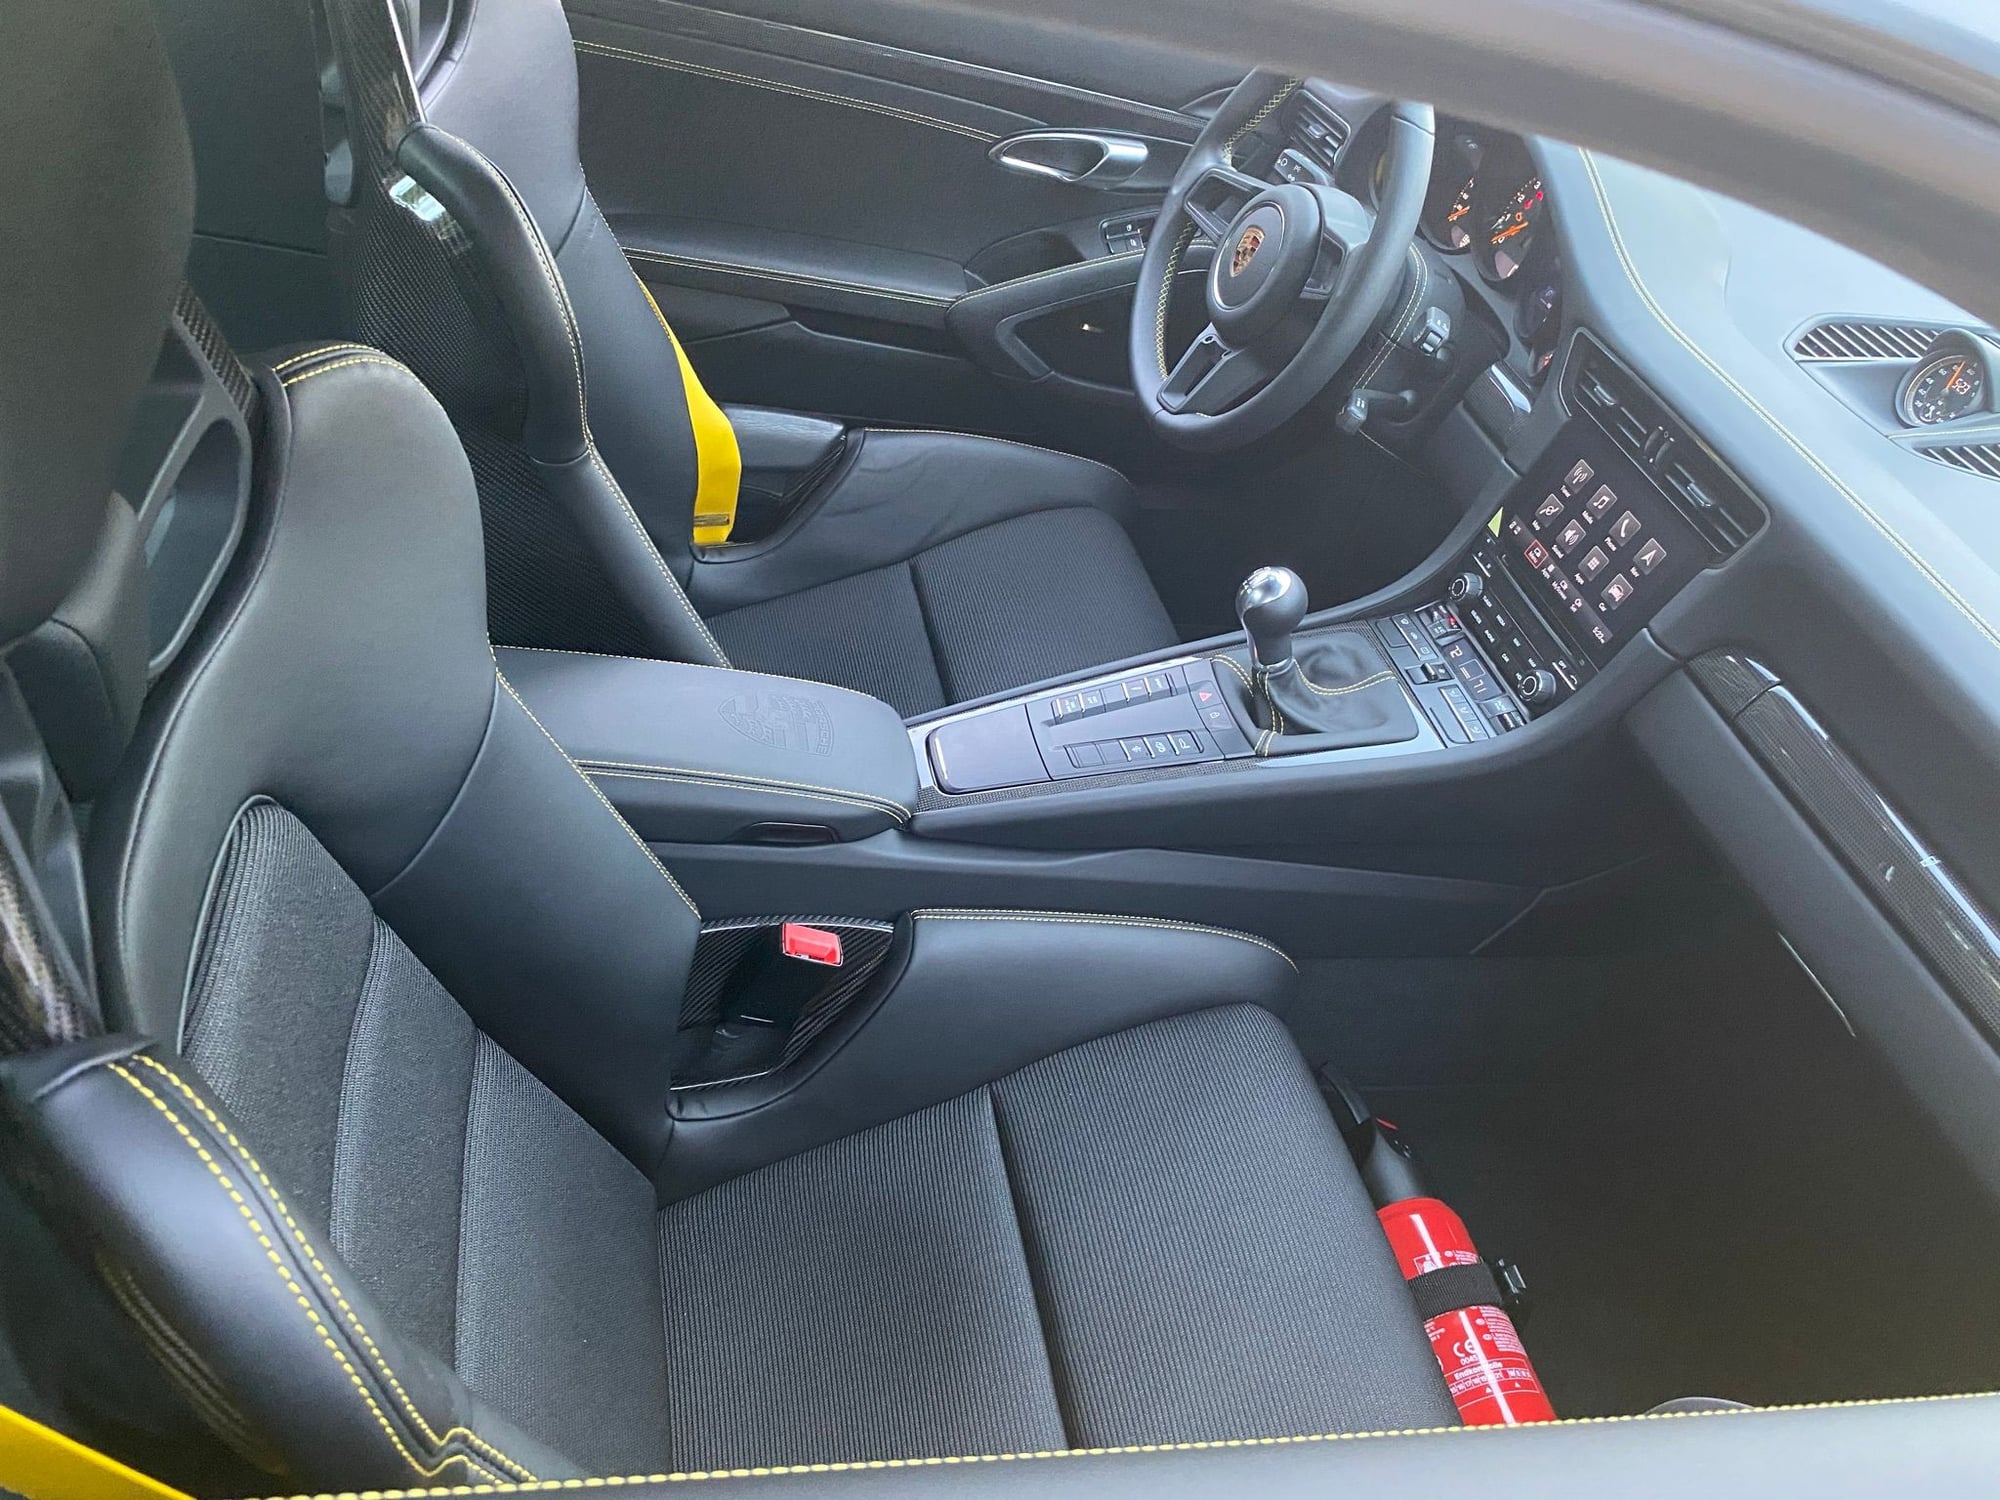 2019 Porsche GT3 - 2019 GT3 Touring $186k MSRP racing yellow 2,900 miles Warranty until March 2025 - Used - VIN WP0AC2A93KS149384 - 2WD - Manual - Coupe - Yellow - Parkland, FL 33067, United States